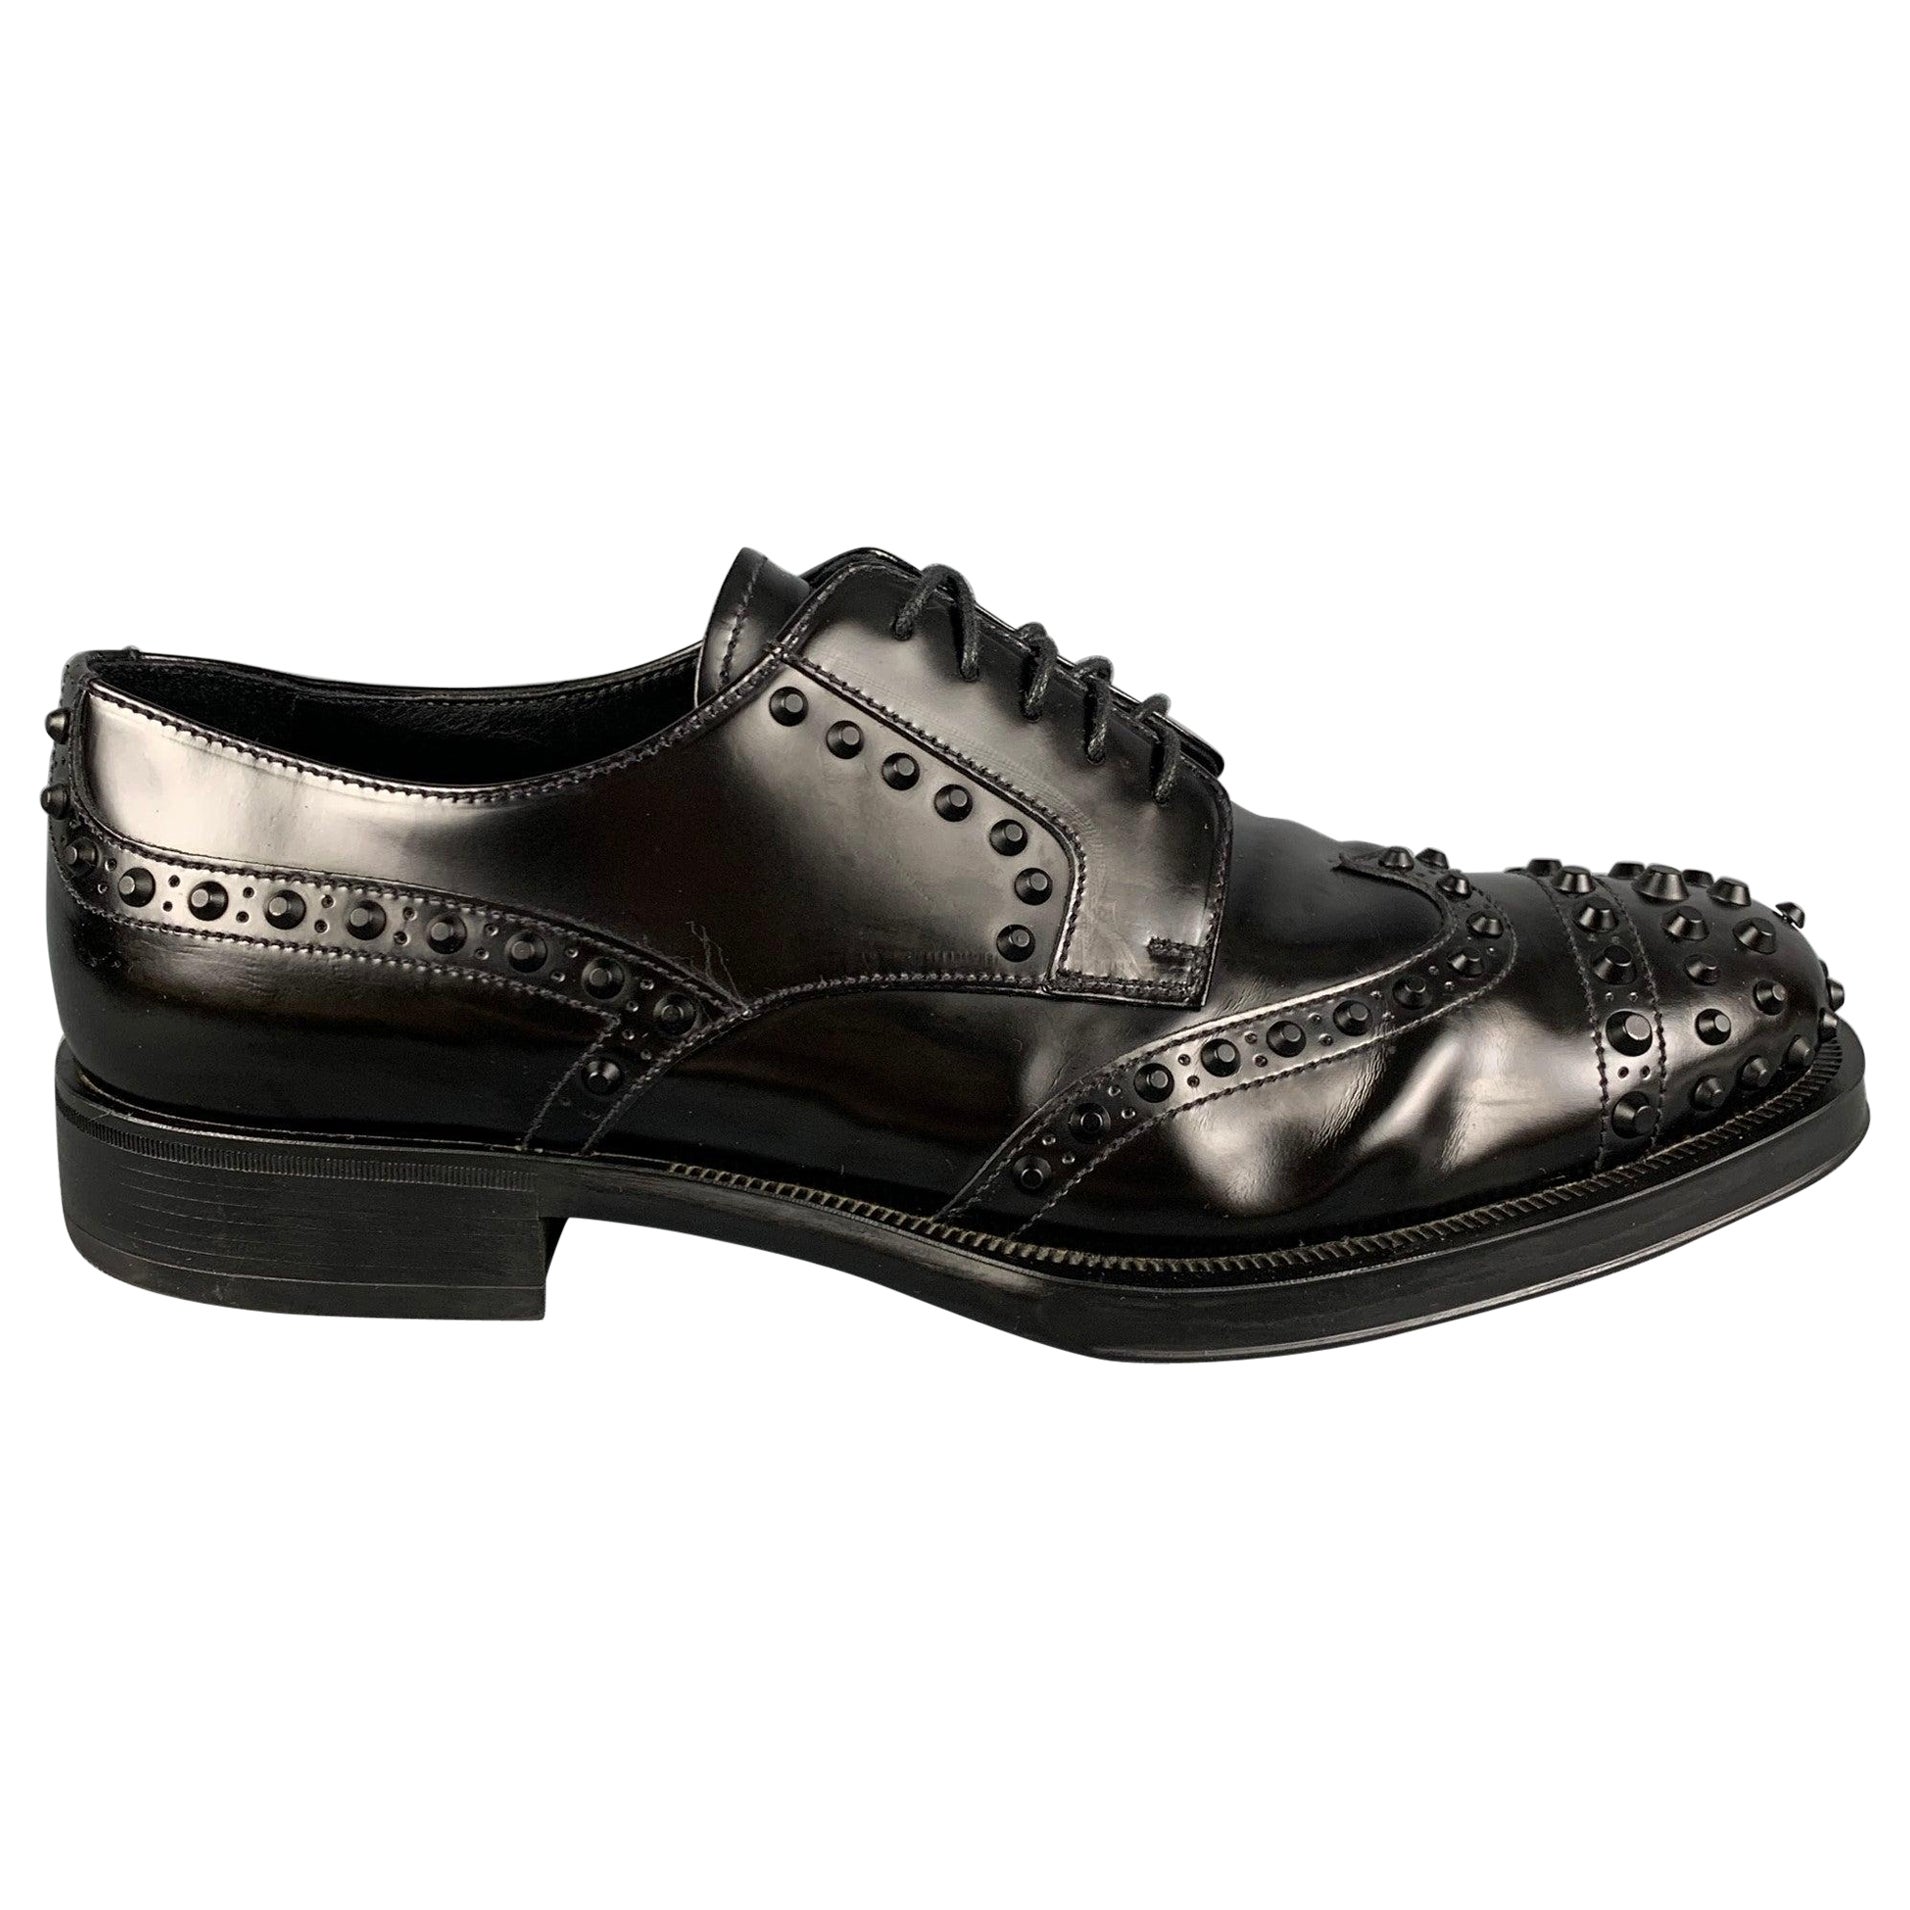 PRADA Size 10.5 Black Studded Leather Lace Up Shoes For Sale